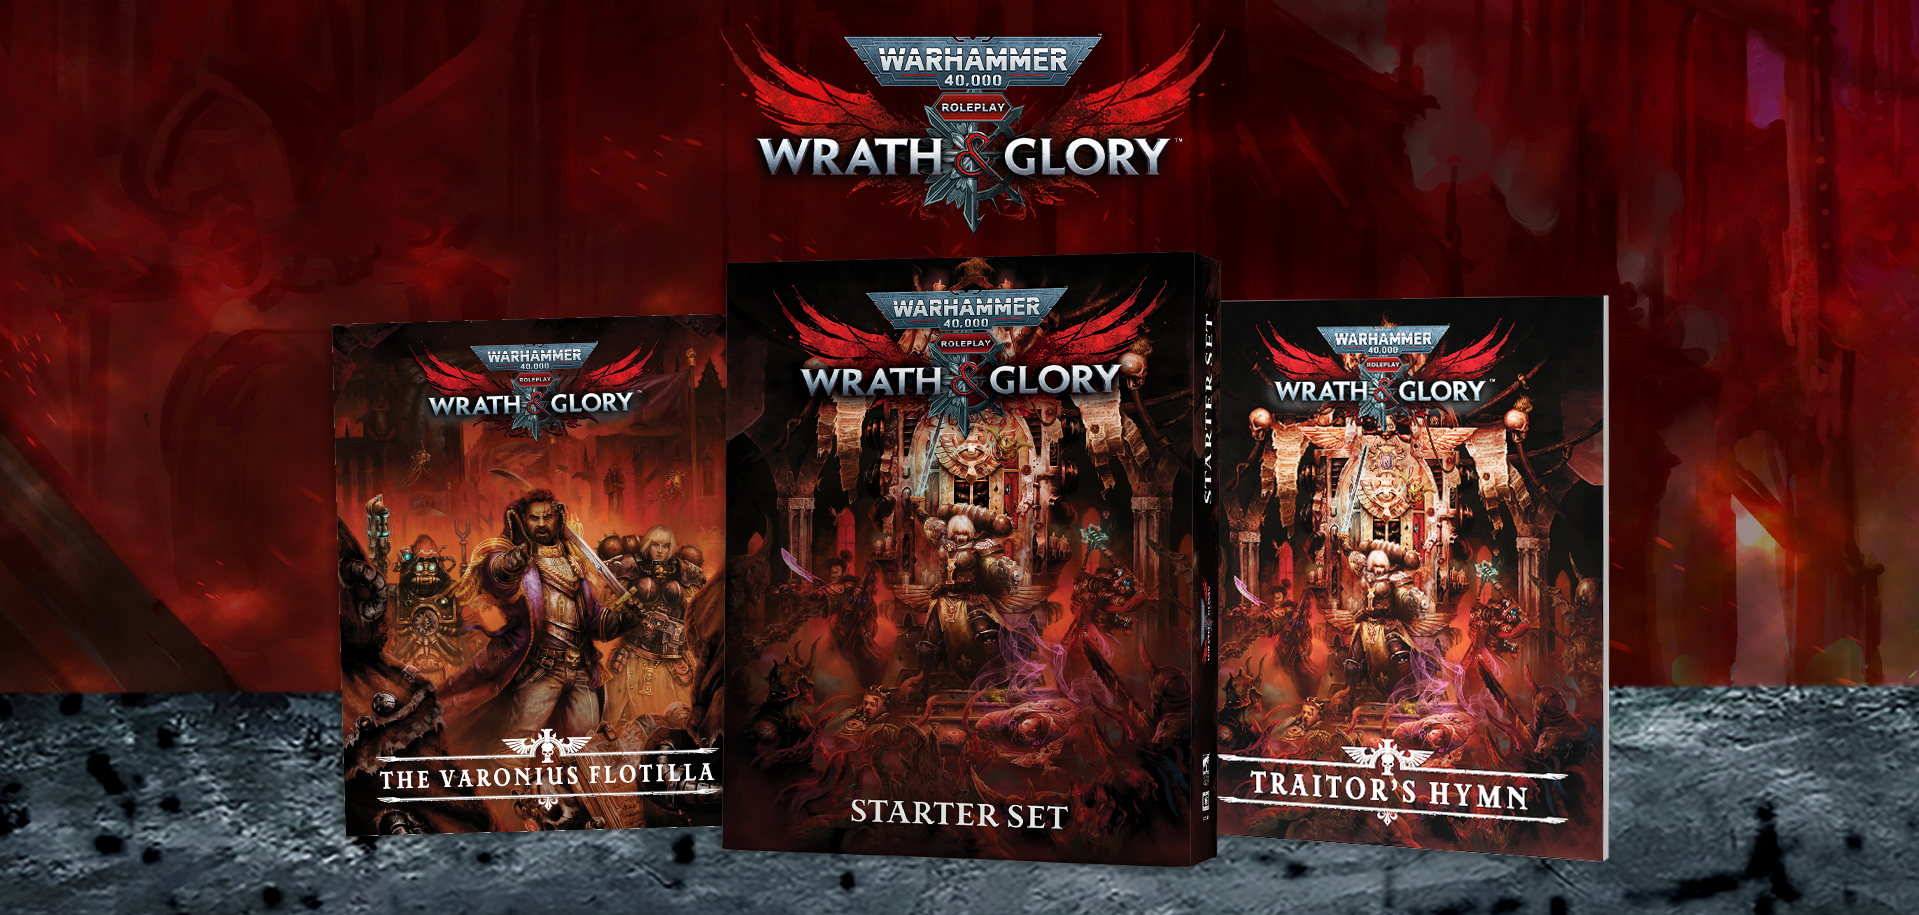 Warhammer 40,000: Wrath & Glory Starter Set is out now!